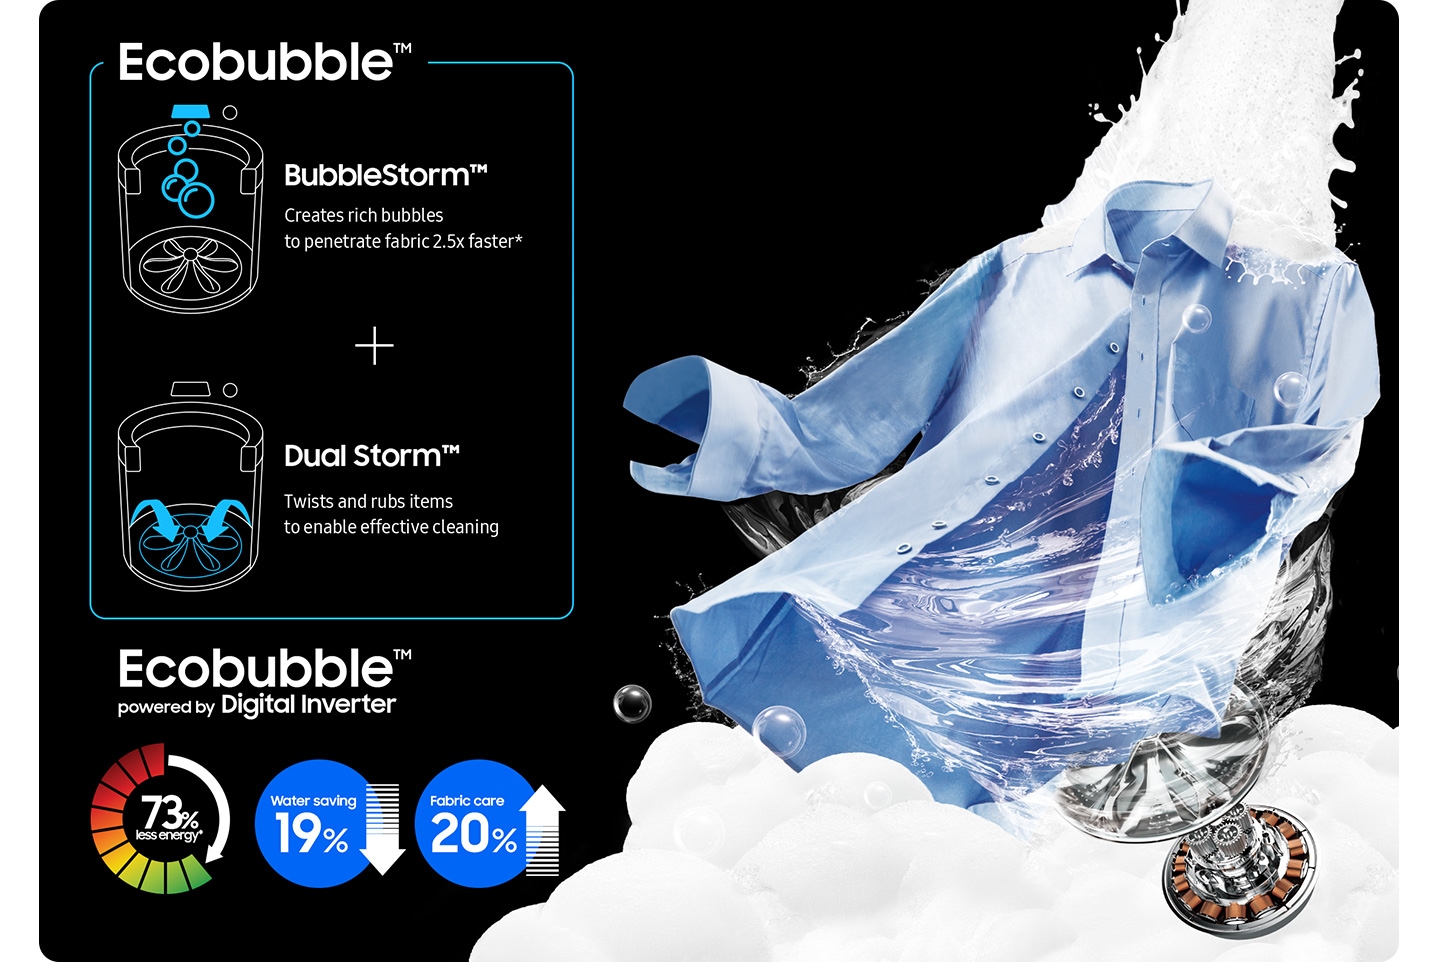 A strong stream of water, foam, and a Digital Inverter Technology motor are washing a blue shirt. Bubblestorm™ creates rich bubbles to penetrate fabric 2.5x faster* and Dual Storm™ twists and rubs items to enable effective cleaning. Ecobubble™ powered by Digital Inverter, saves 73%" of energy, 19%" of water and cares better 20%" of fabric.